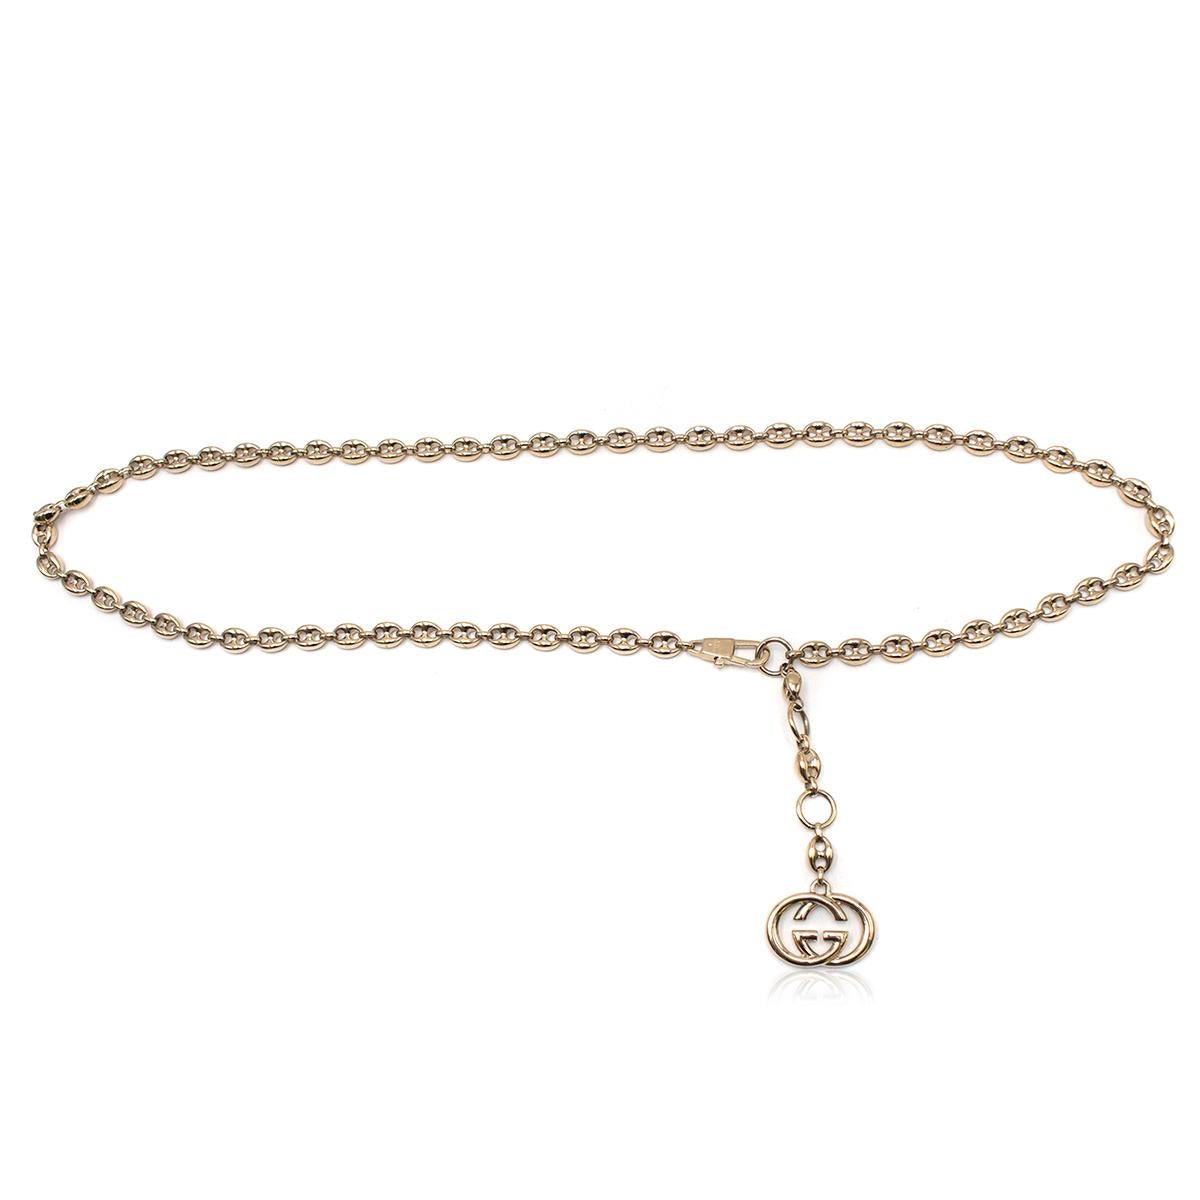 Gucci Gold Tone Mariner Link Chain Belt

-Chain belt with 'GG' charm
-Lobster clasp closure
-Adjustable length

Please note, these items are pre-owned and may show signs of being stored even when unworn and unused. This is reflected within the